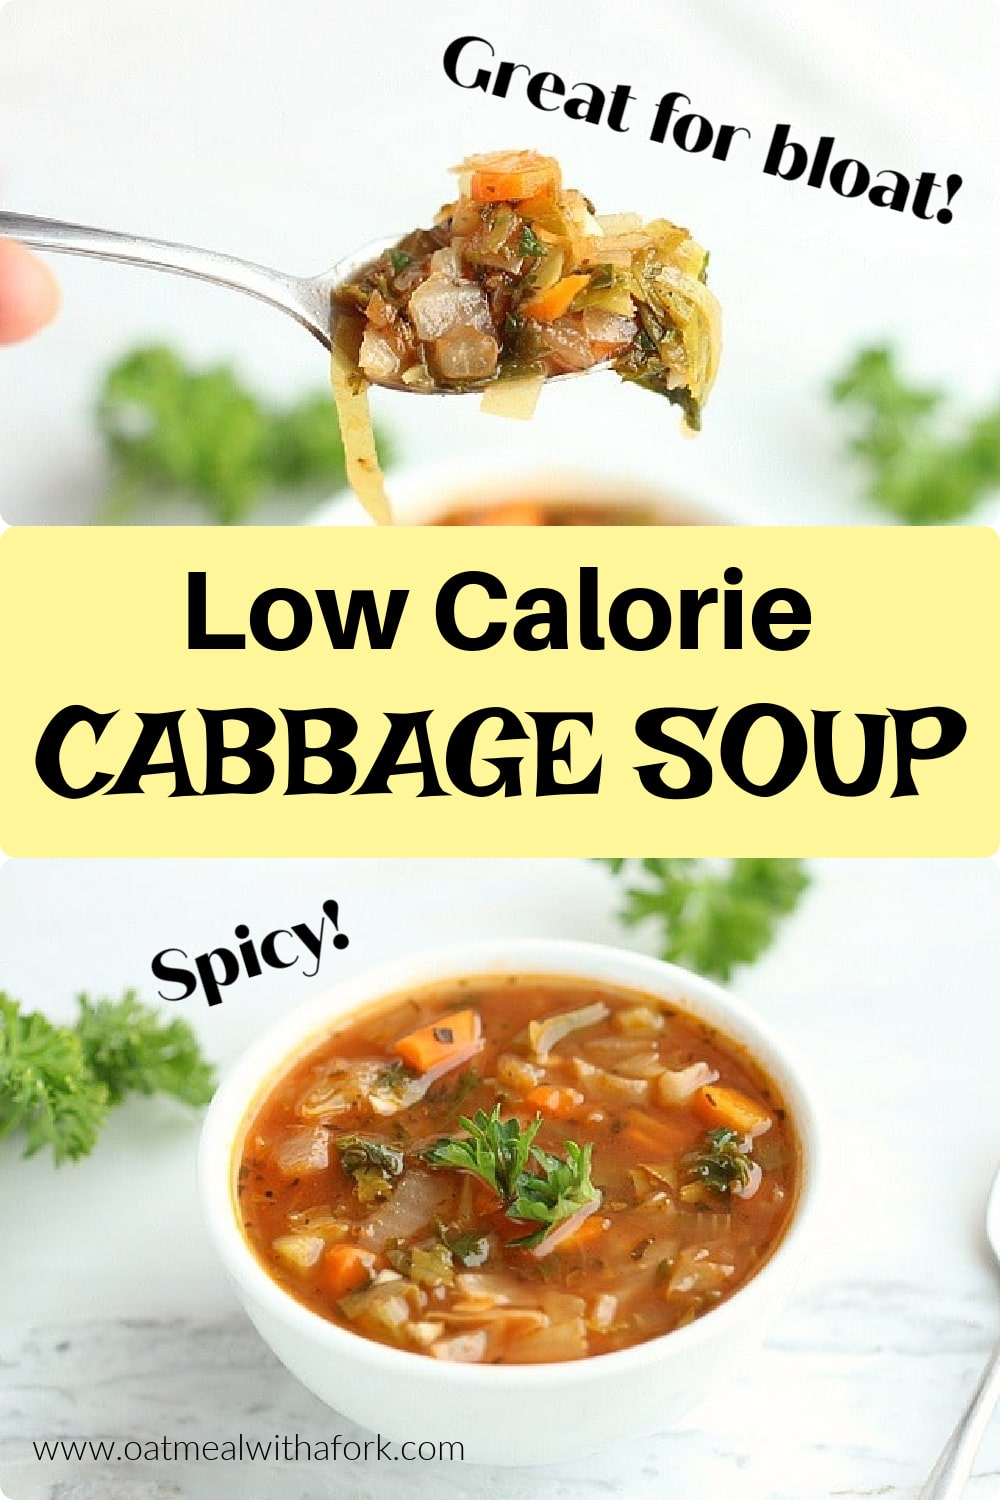 Low Calorie Spicy Cabbage Soup - Oatmeal with a Fork